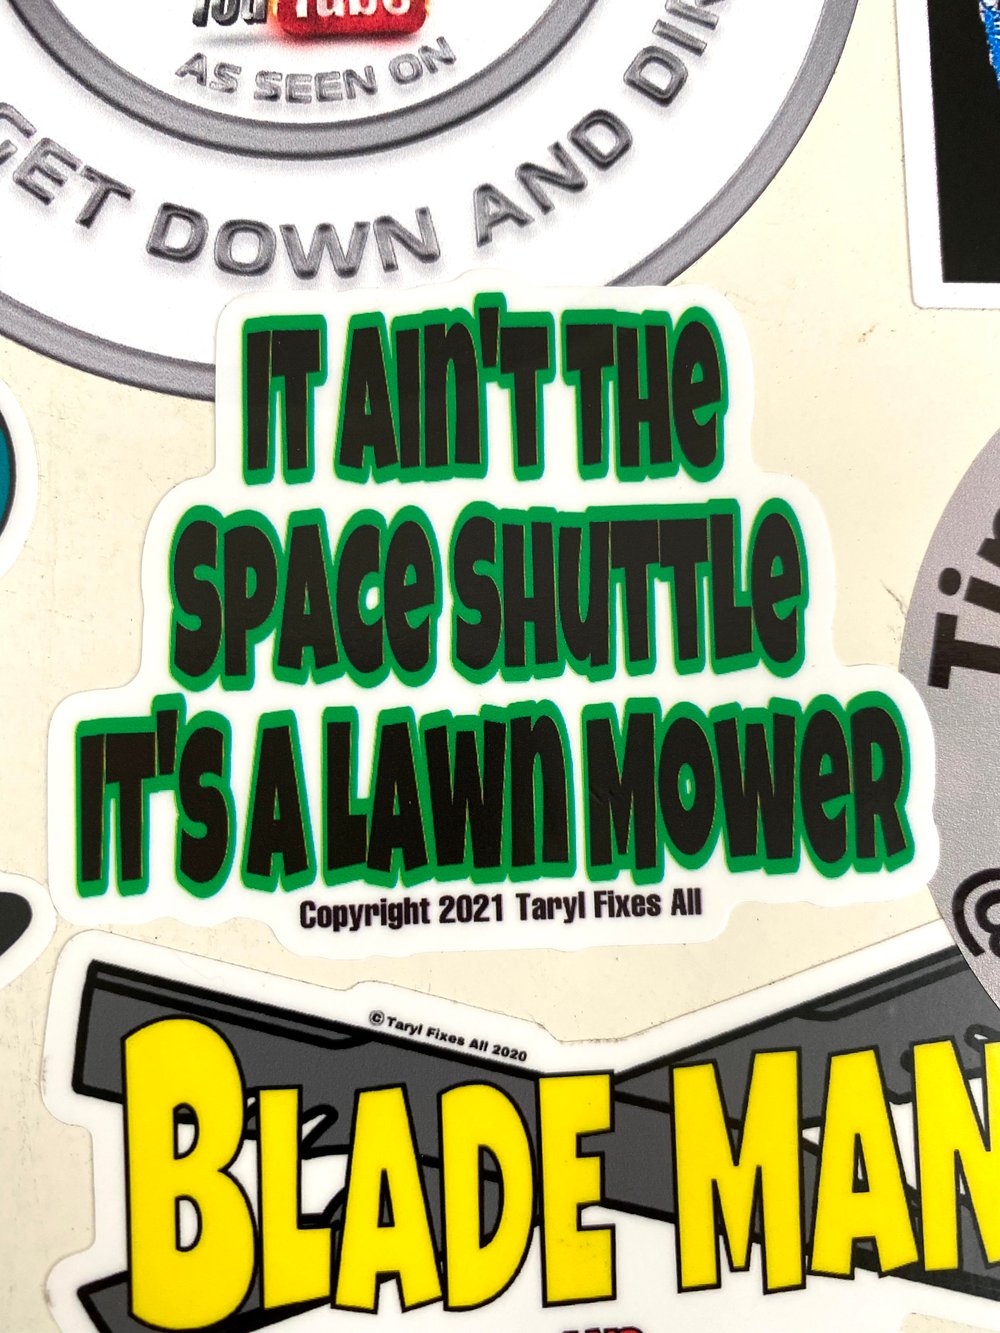 “It Ain’t The Space Shuttle” Stickers!! 